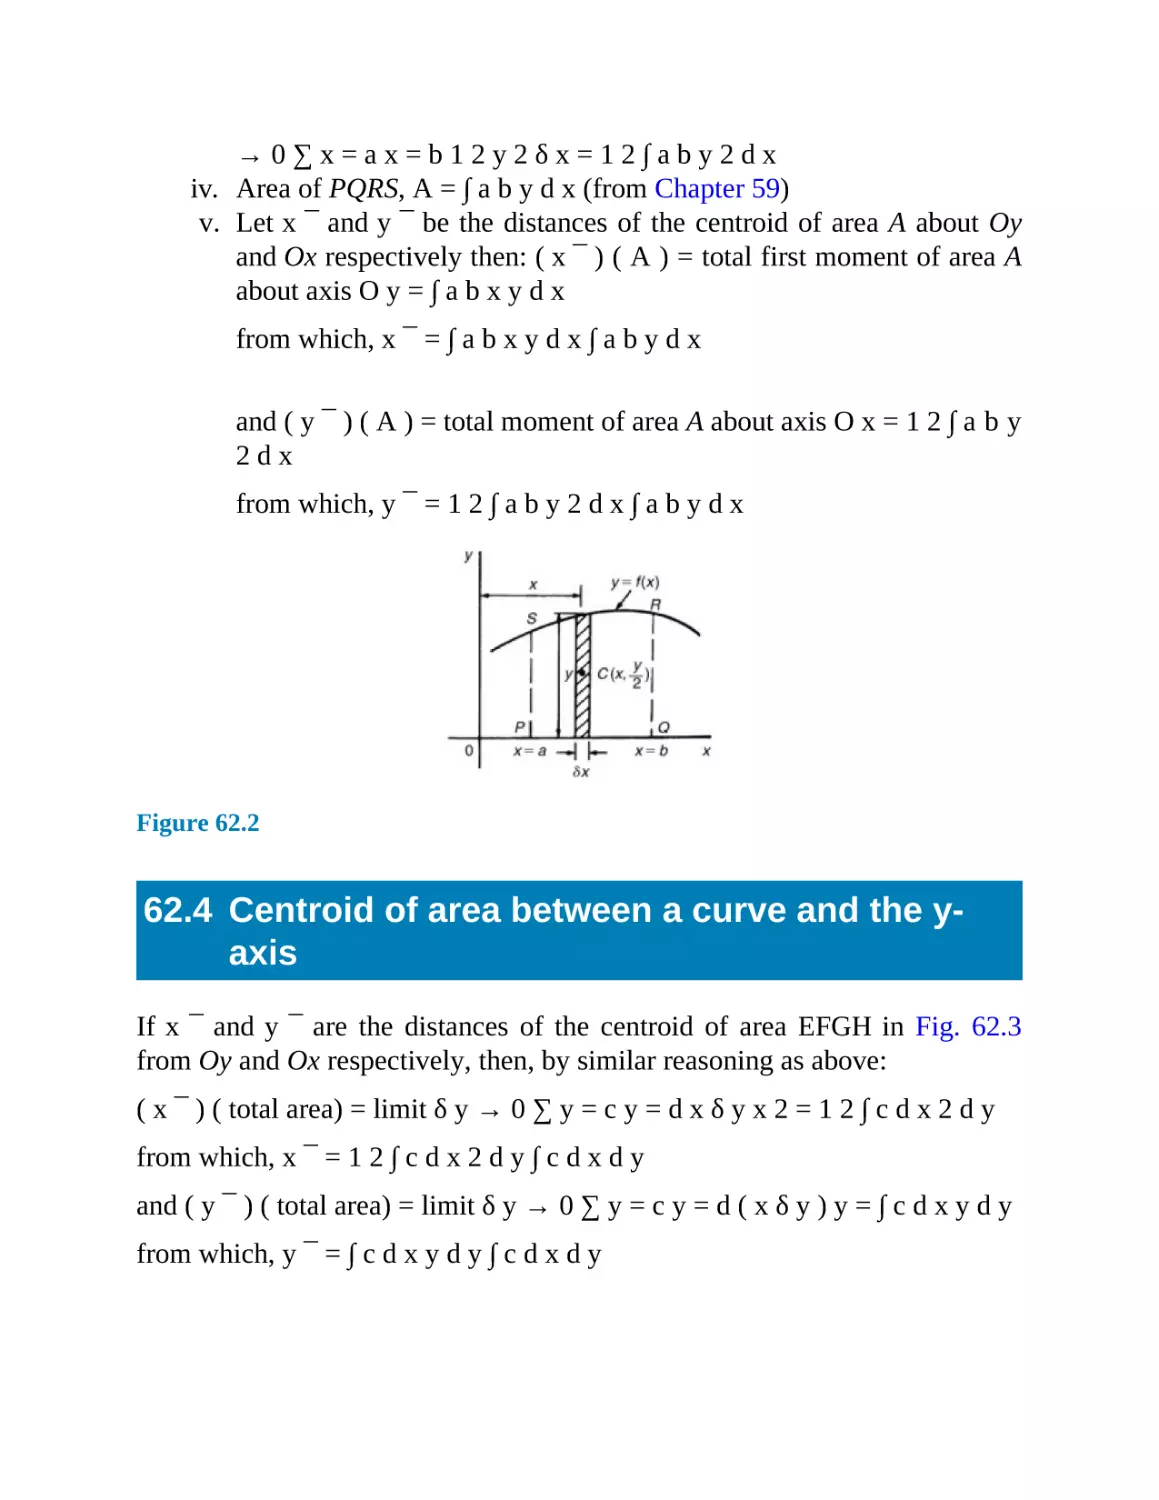 62.4 Centroid of area between a curve and the y-axis